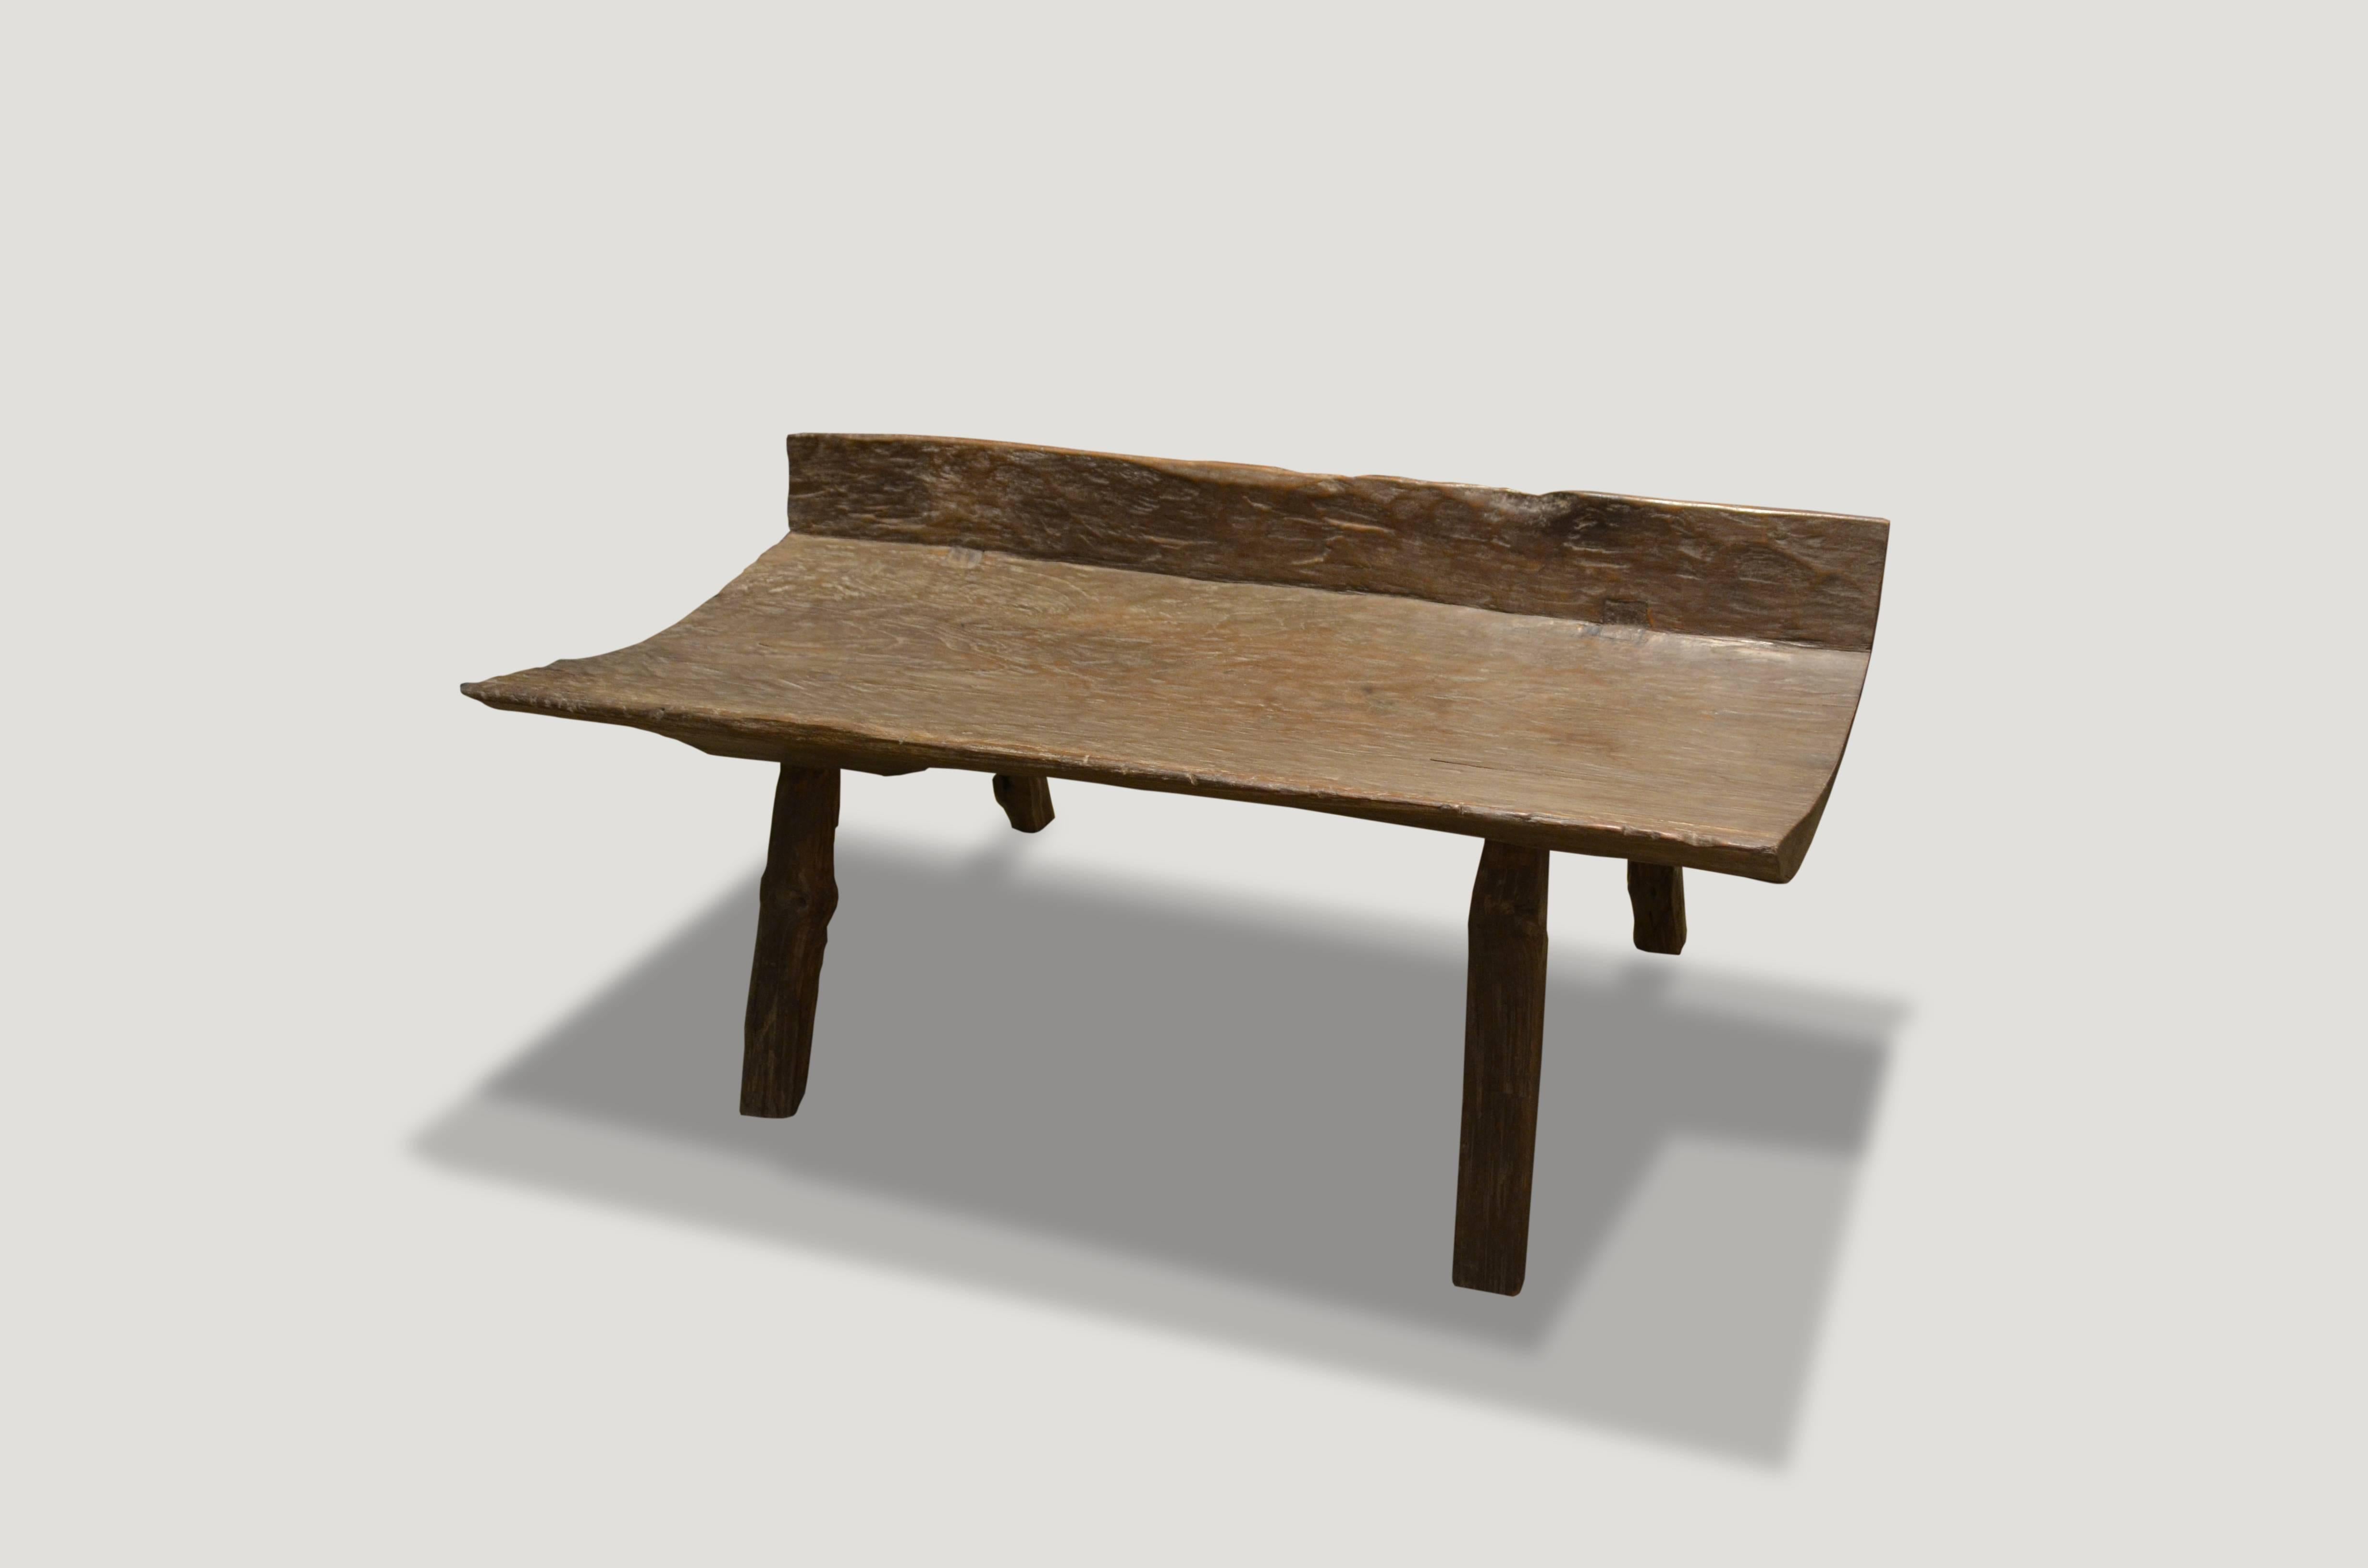 Antique Primitive bench hand-carved from a single slab of teak aged wood with beautiful patina.

This bench was sourced in the spirit of wabi-sabi, a Japanese philosophy that beauty can be found in imperfection and impermanence. It’s a beauty of